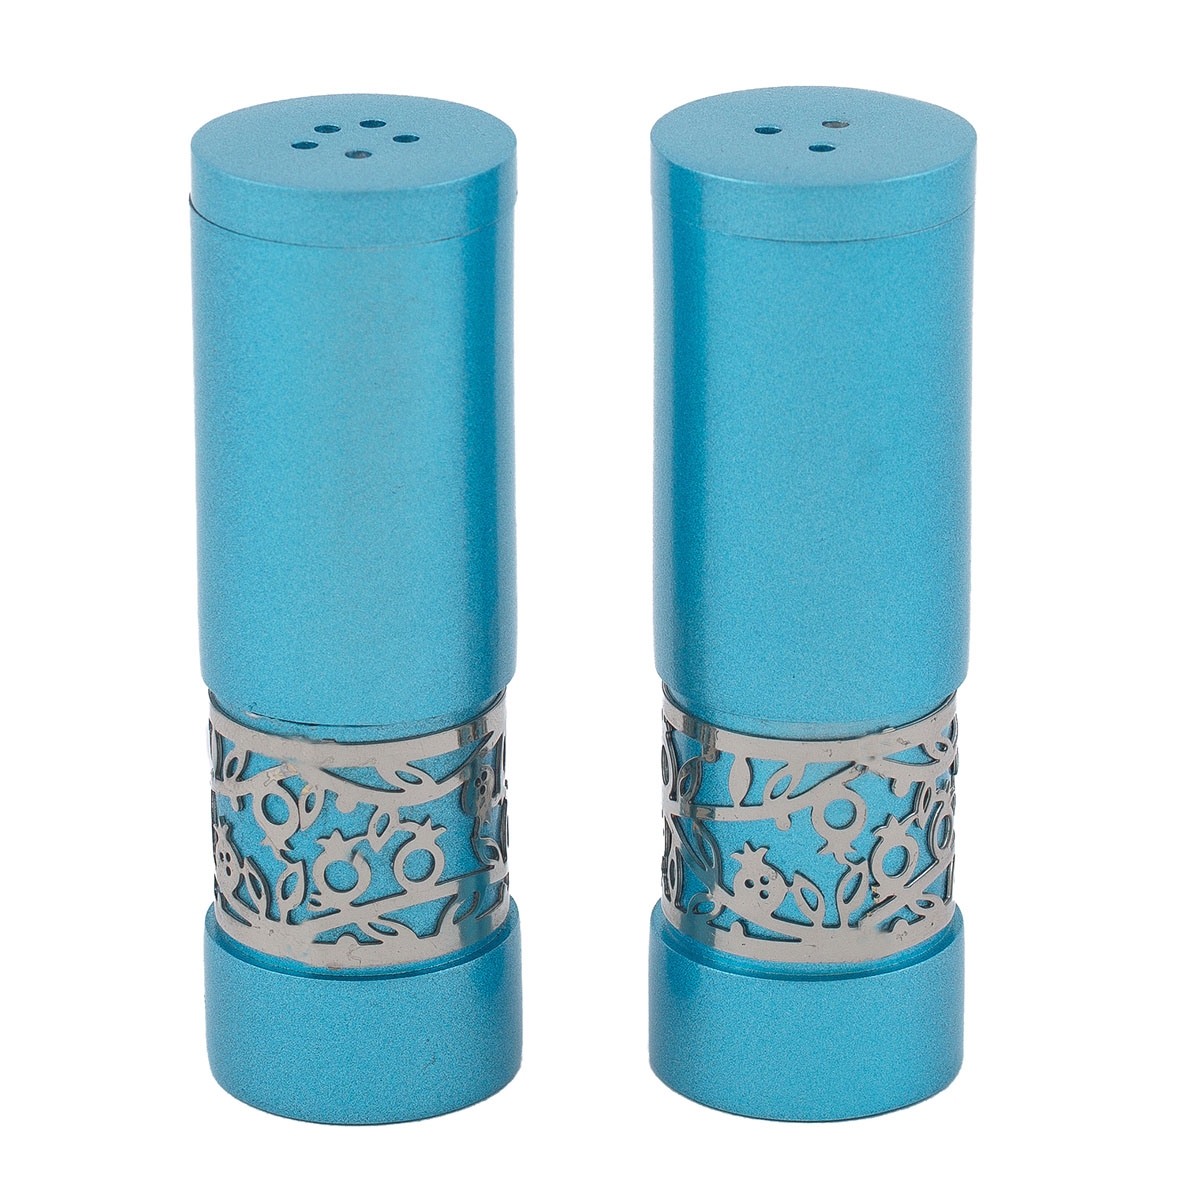 Yair Emanuel Anodized Aluminum Pomegranates Salt and Pepper Shakers – Teal and Silver  - 1